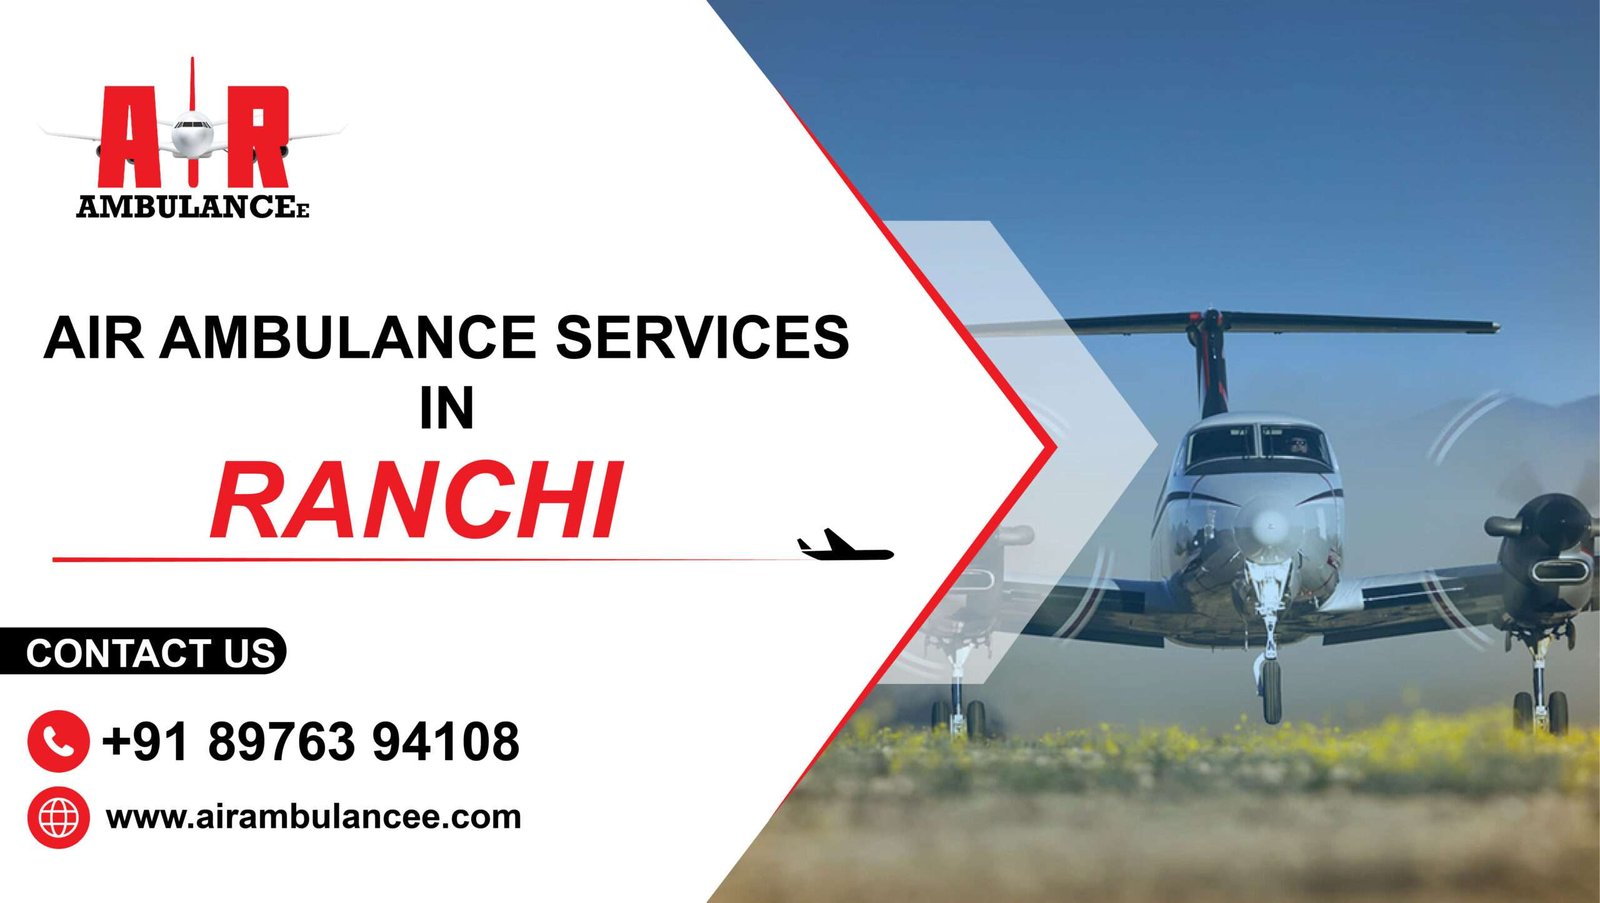 Air Ambulance Services In Ranchi